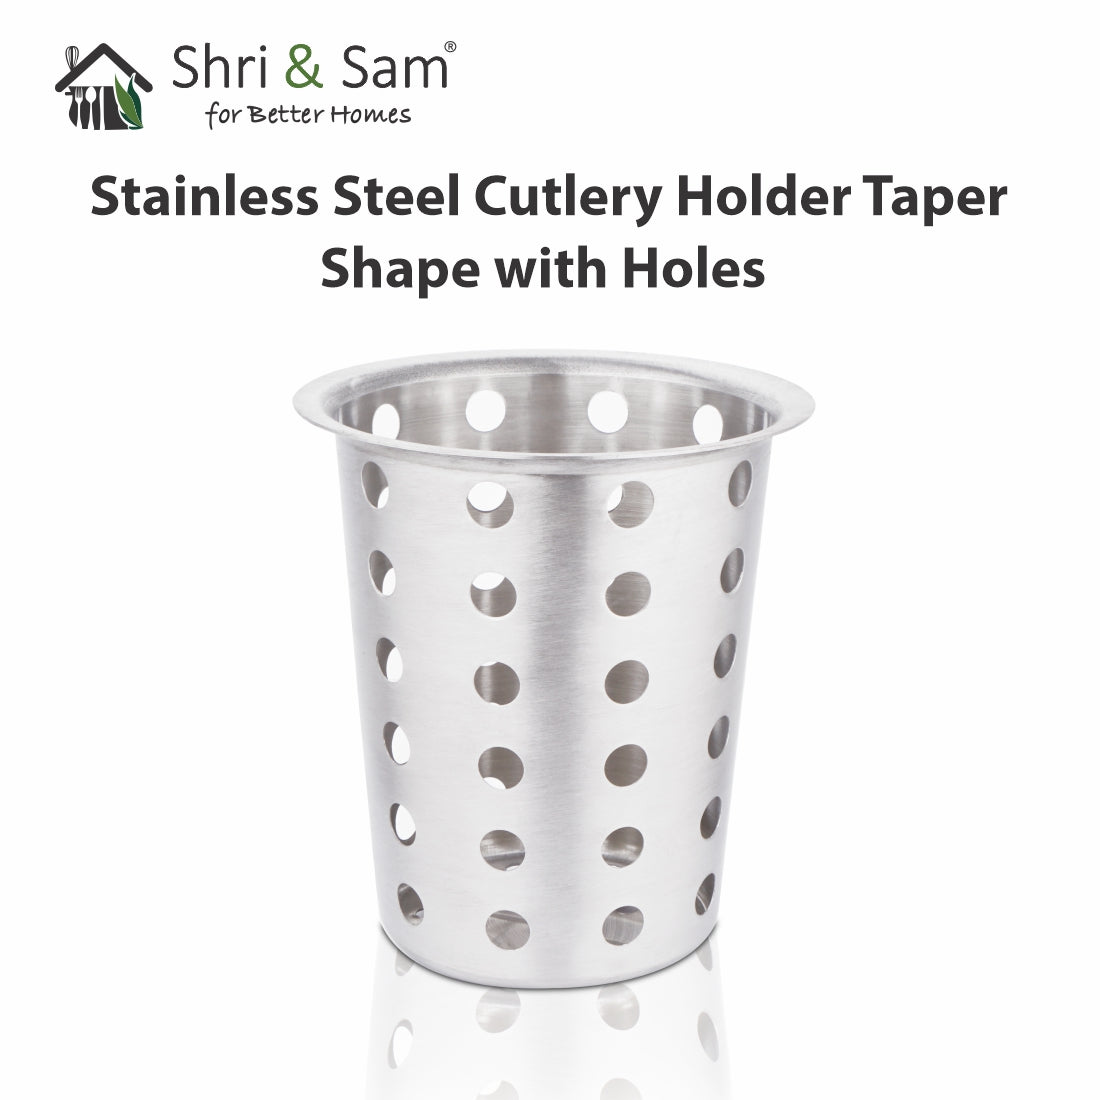 Stainless Steel Cutlery Holder Taper Shape with Holes